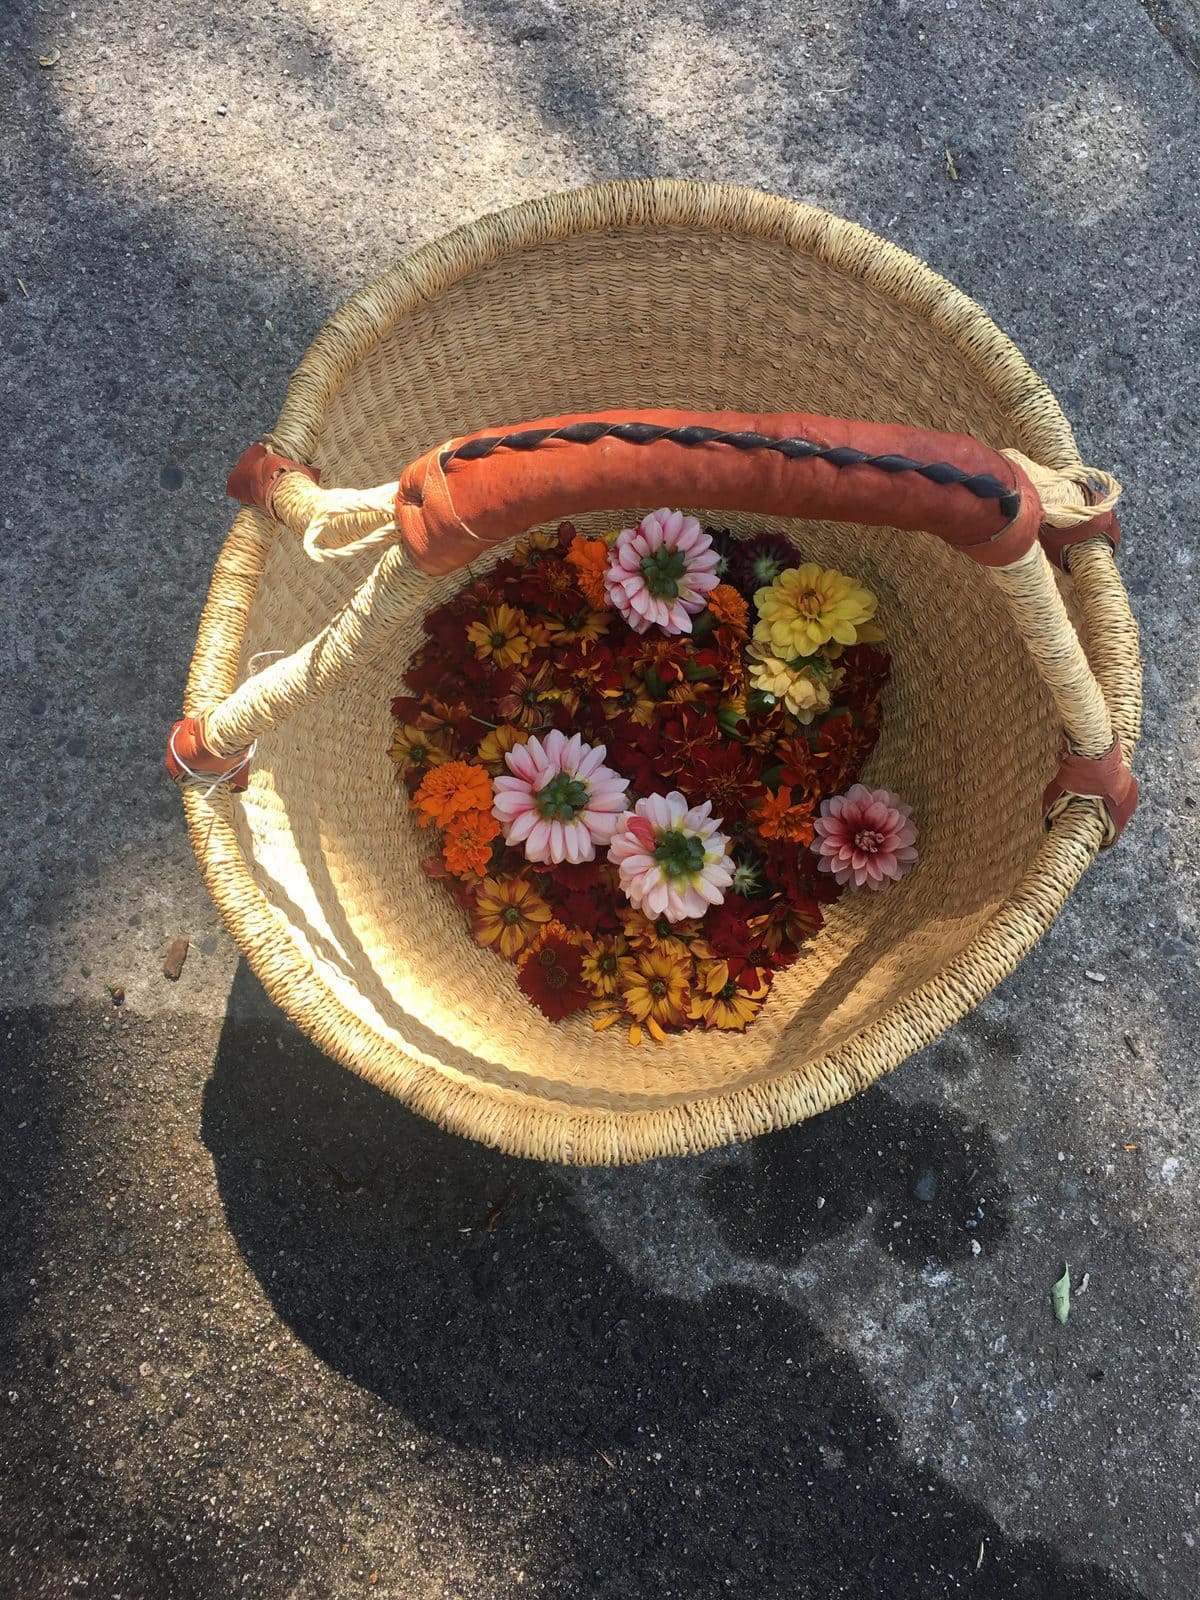 image description: a basket containing freshly-picked flowers and blooms